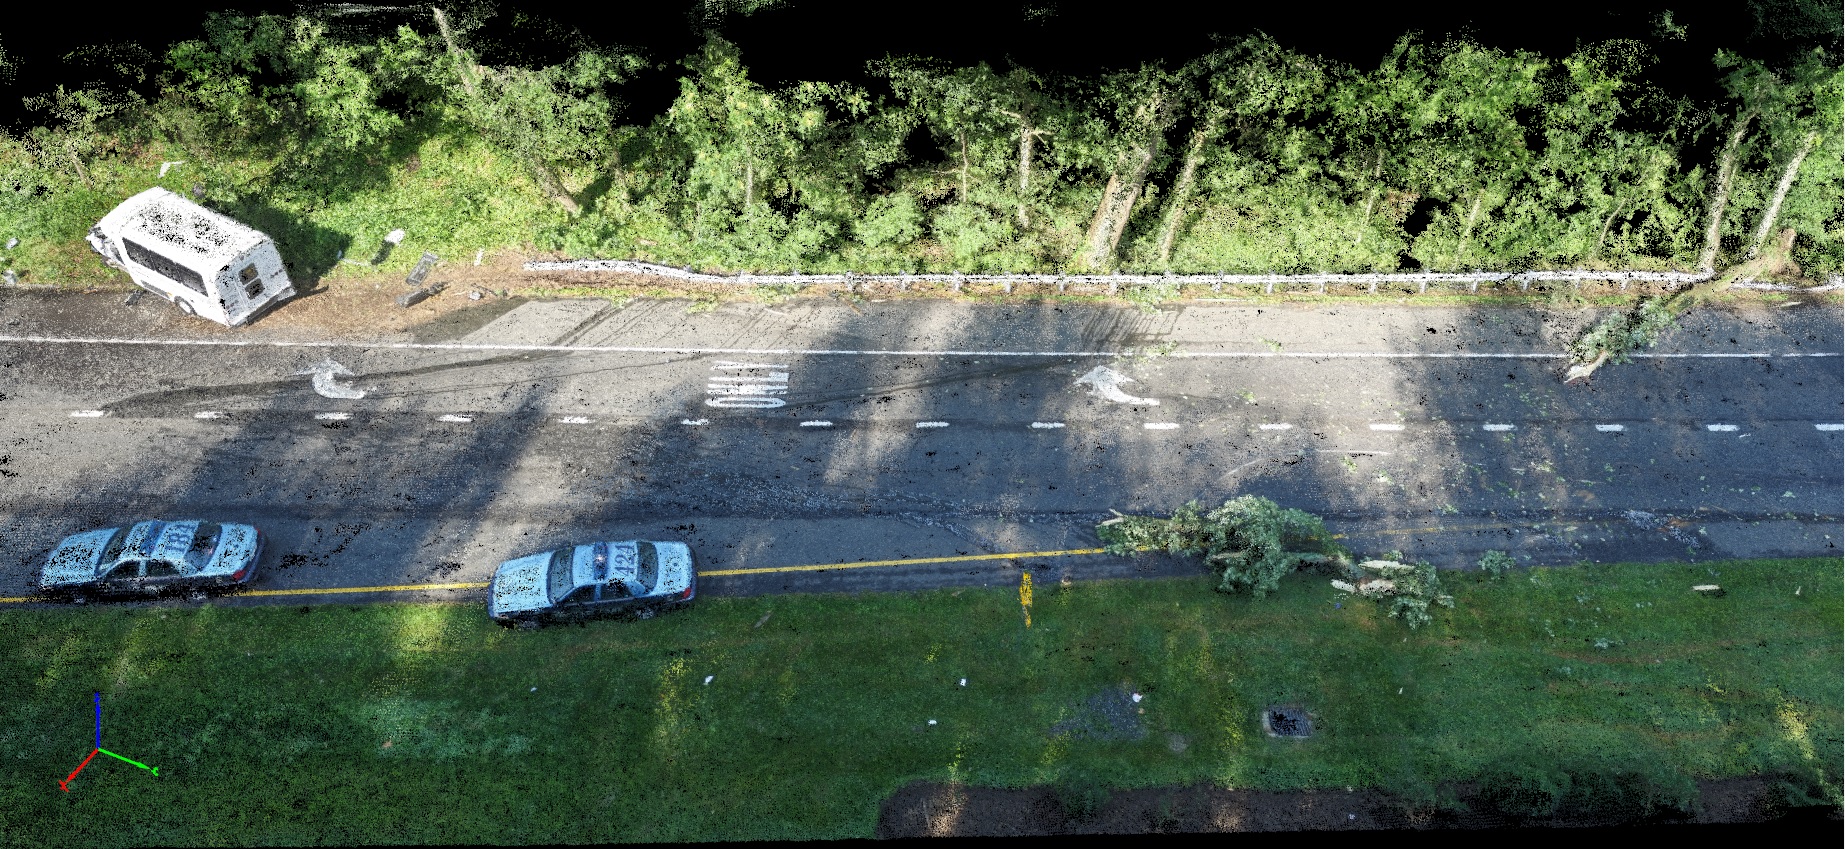 Analysis and documentation of a crash using drone mapping Pix4D